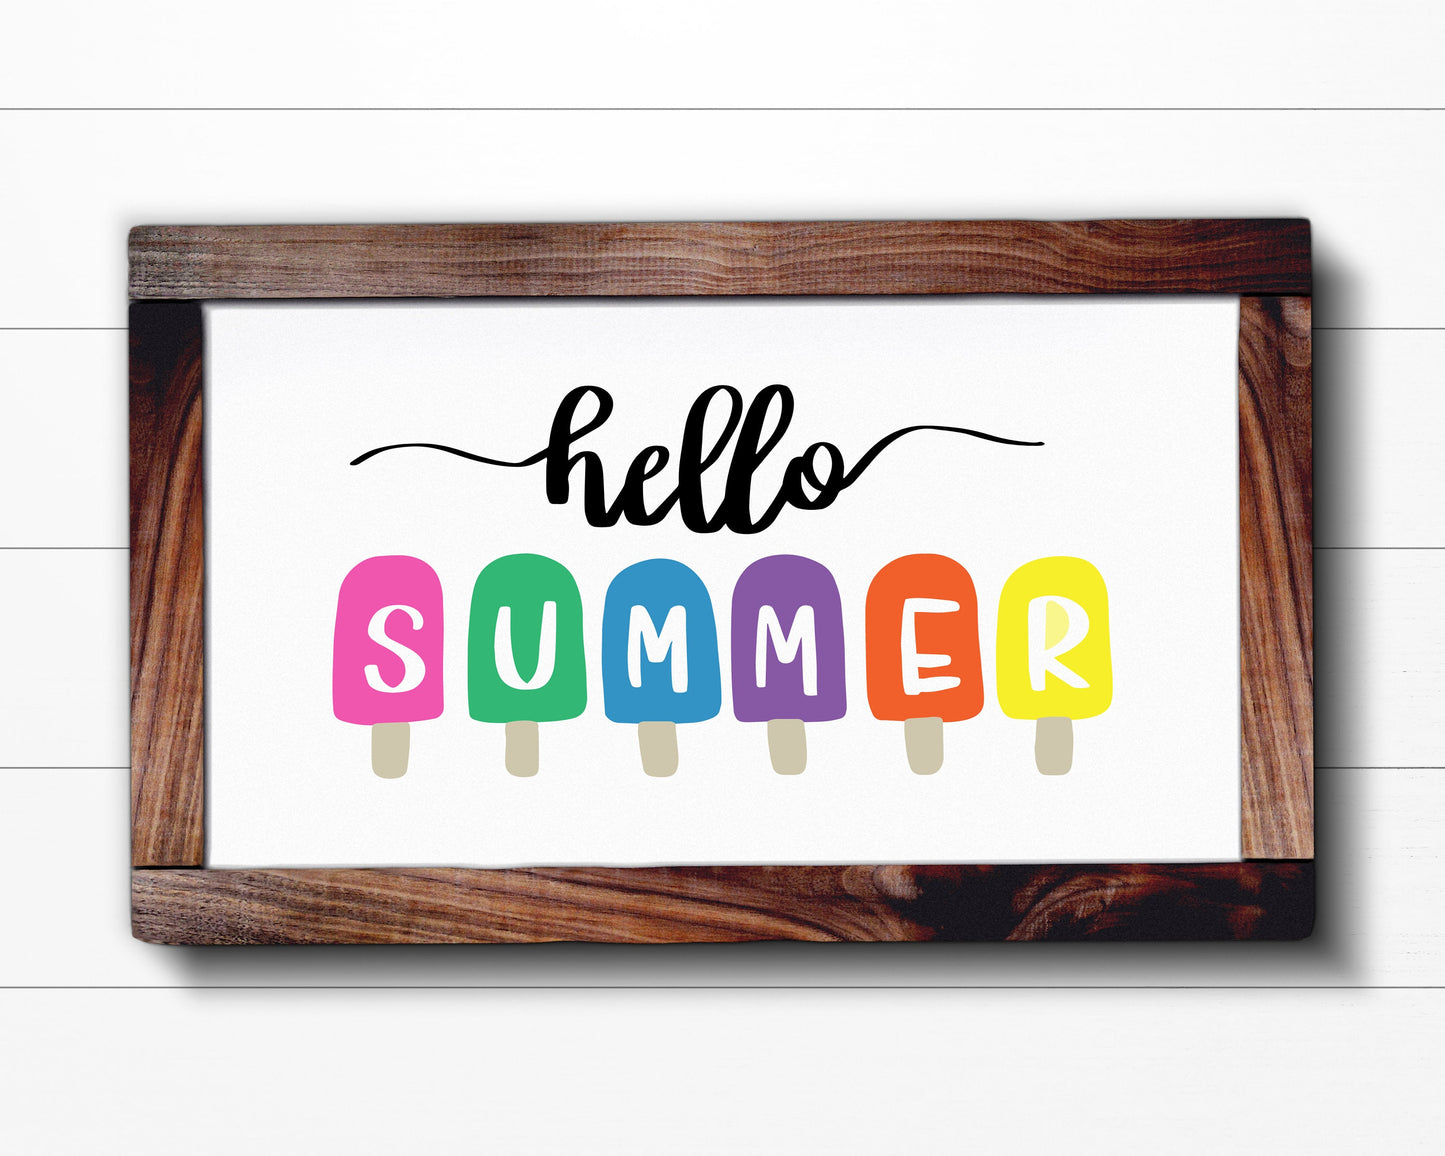 Hello Summer Farmhouse Wood Sign 14x8 inches - Wall Hanging, Home Decor, Summer Time